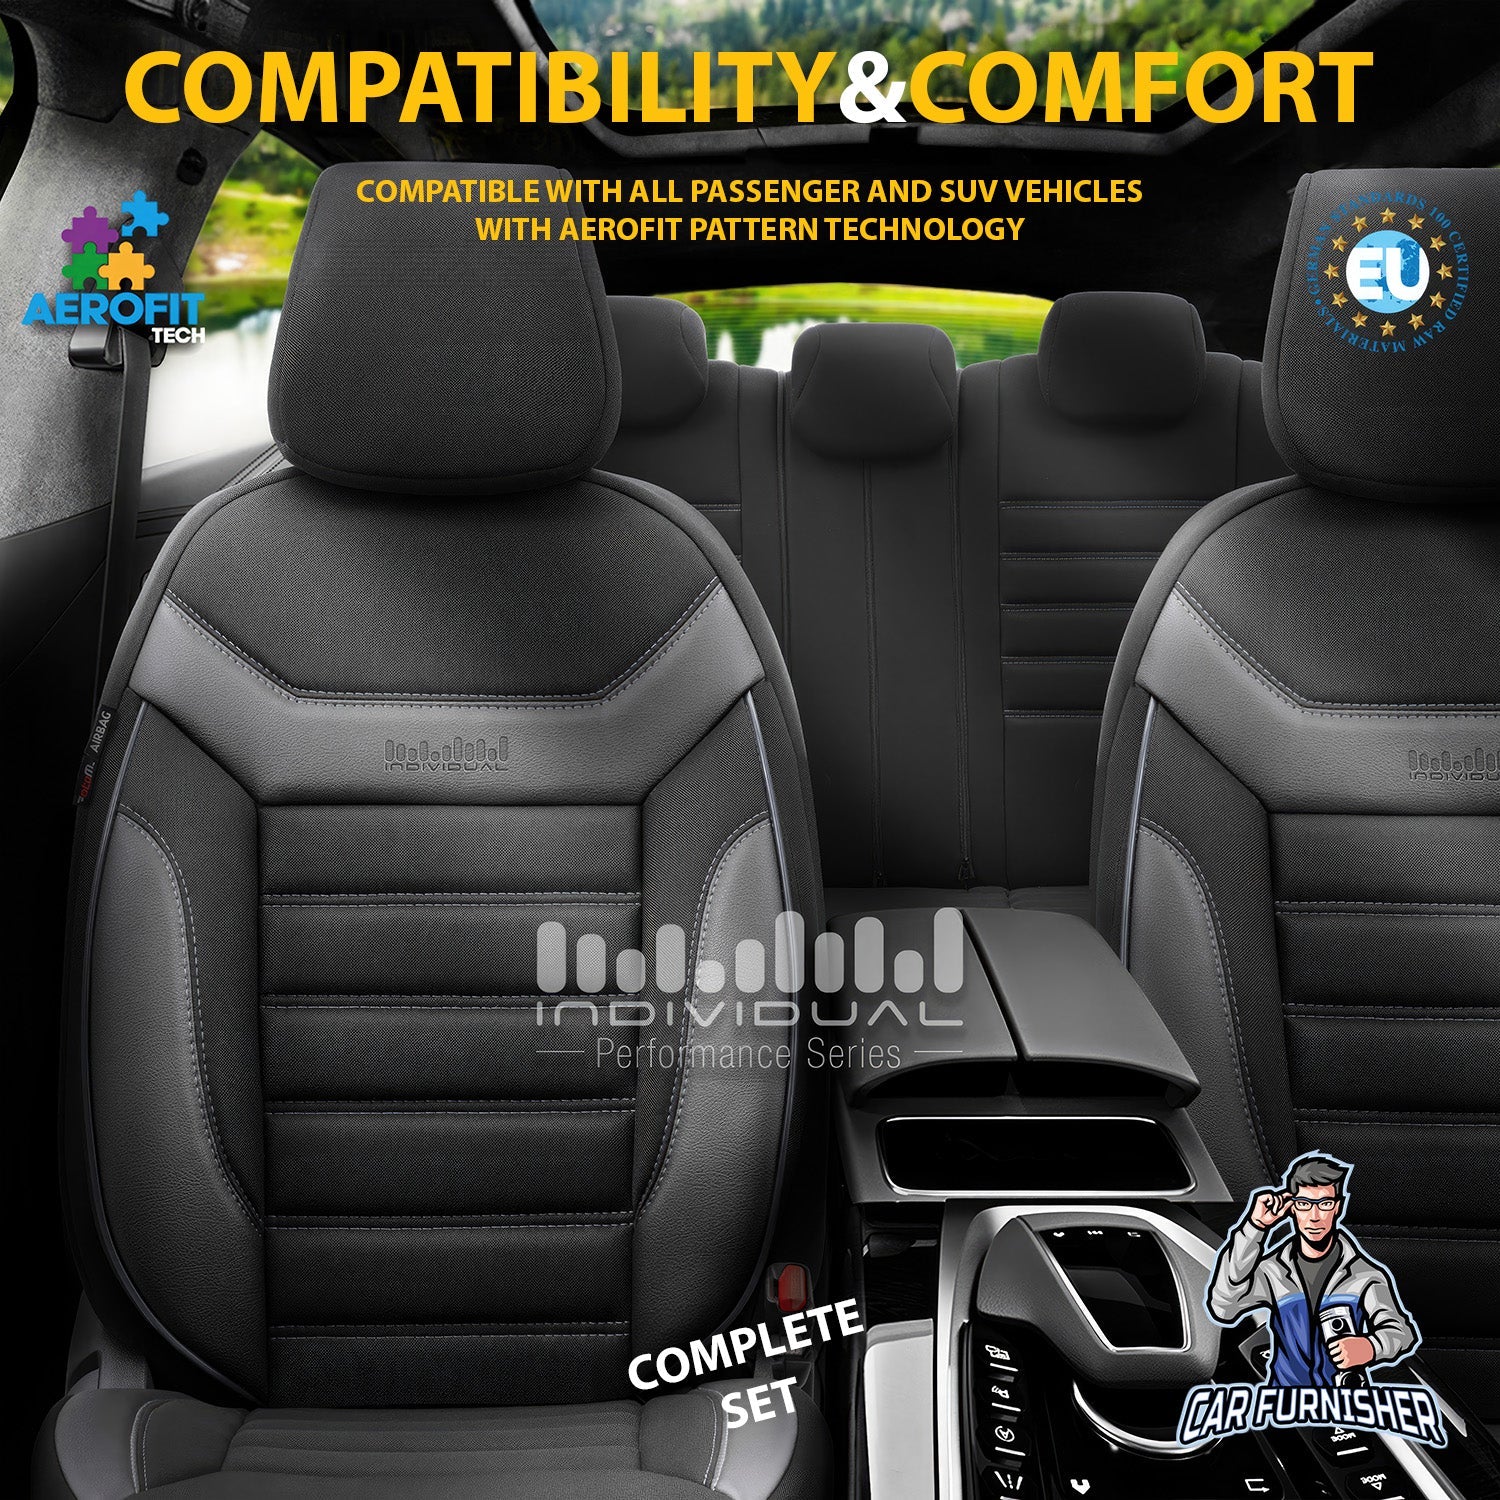 Mercedes 190 Seat Covers Extra Supportive Individual Design Gray 5 Seats + Headrests (Full Set) Leather & Lacoste Fabric